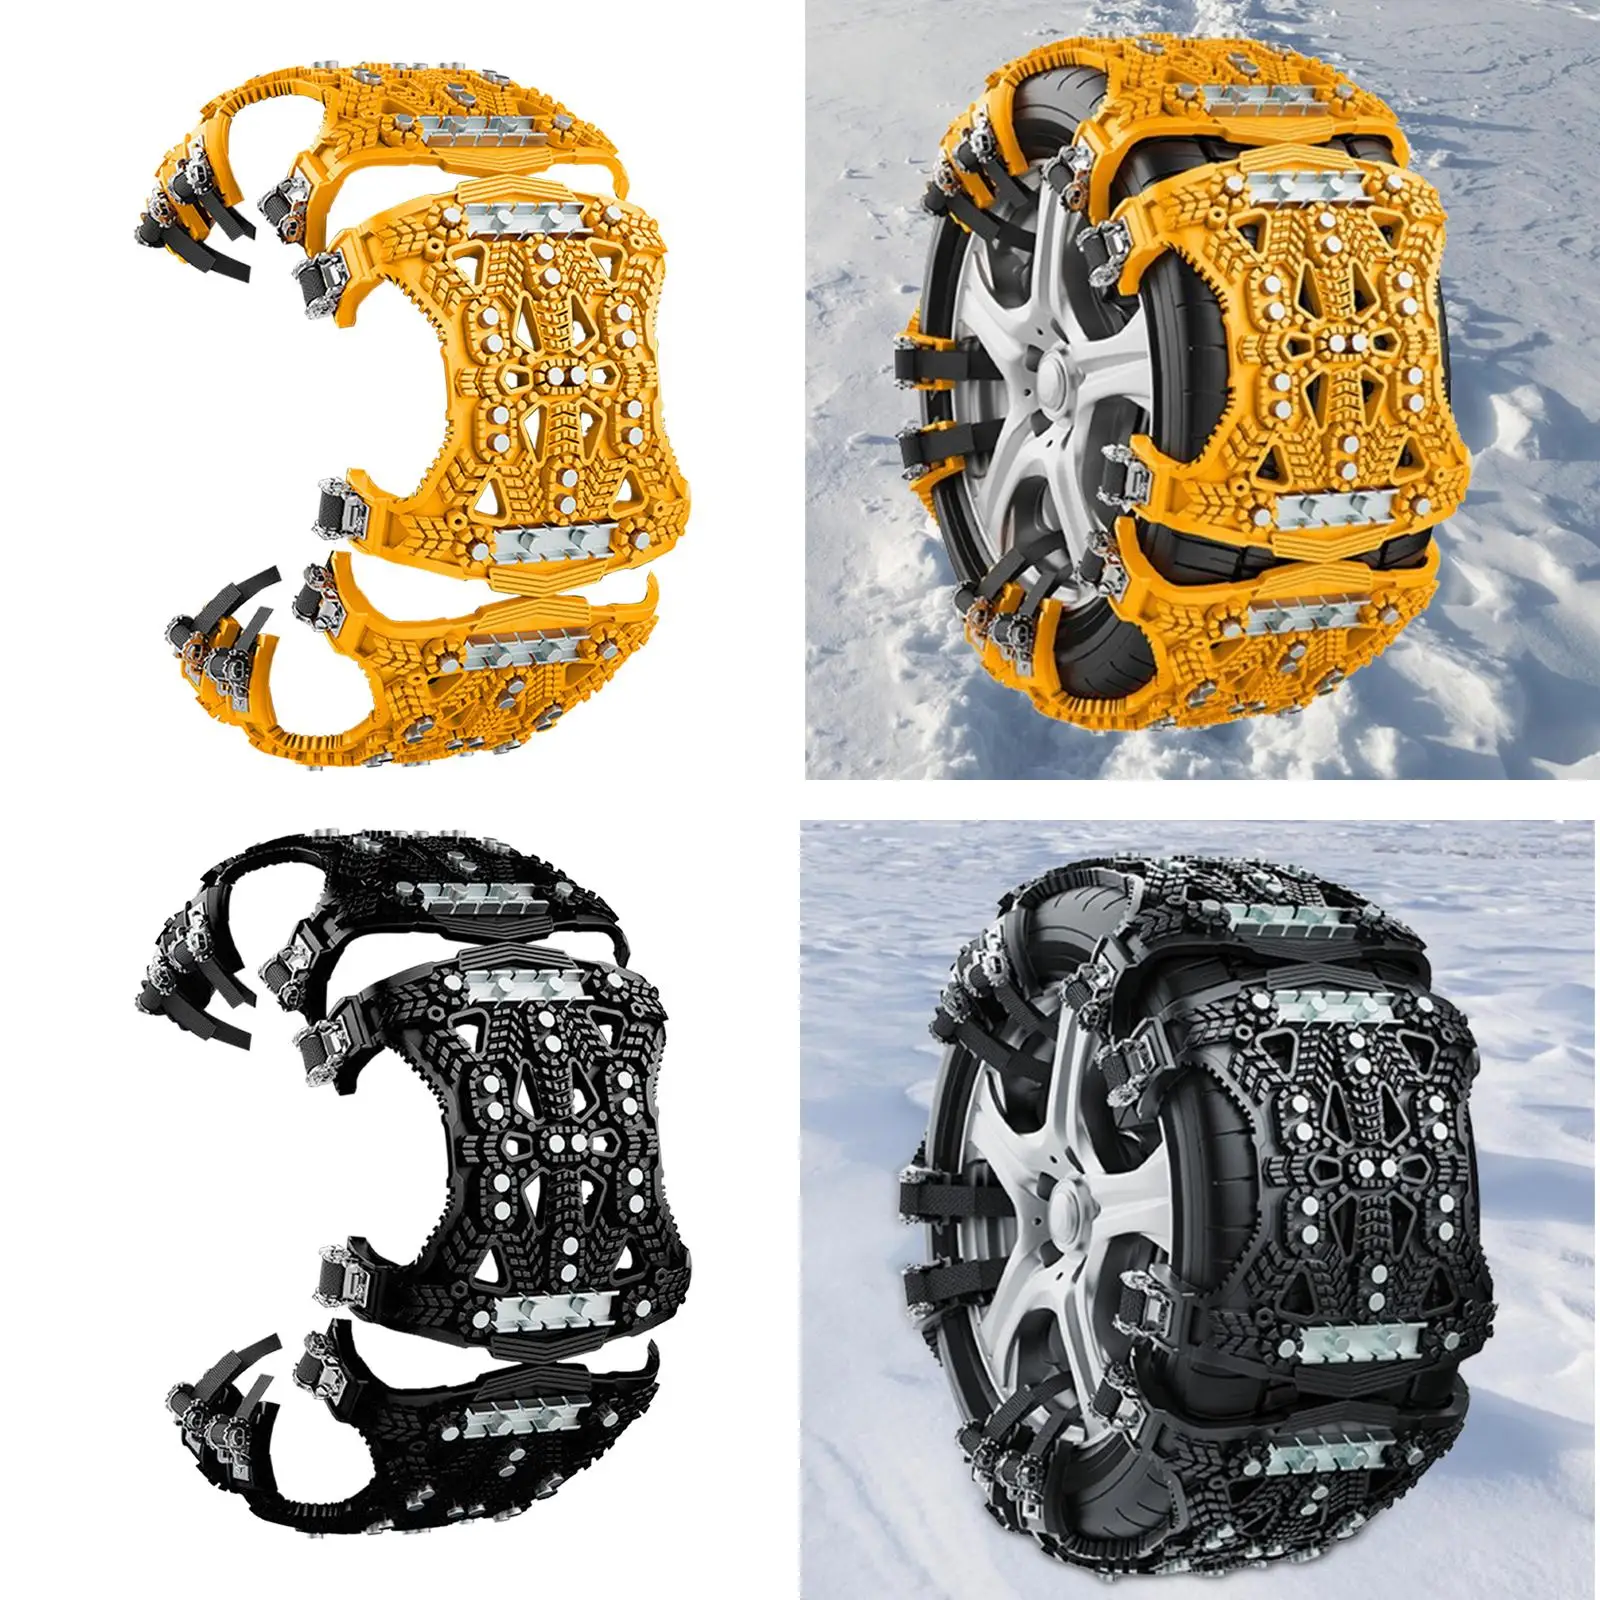 Car Tyres Anti Slip Snow Chain Emergency Accessory for Mud Road Durable